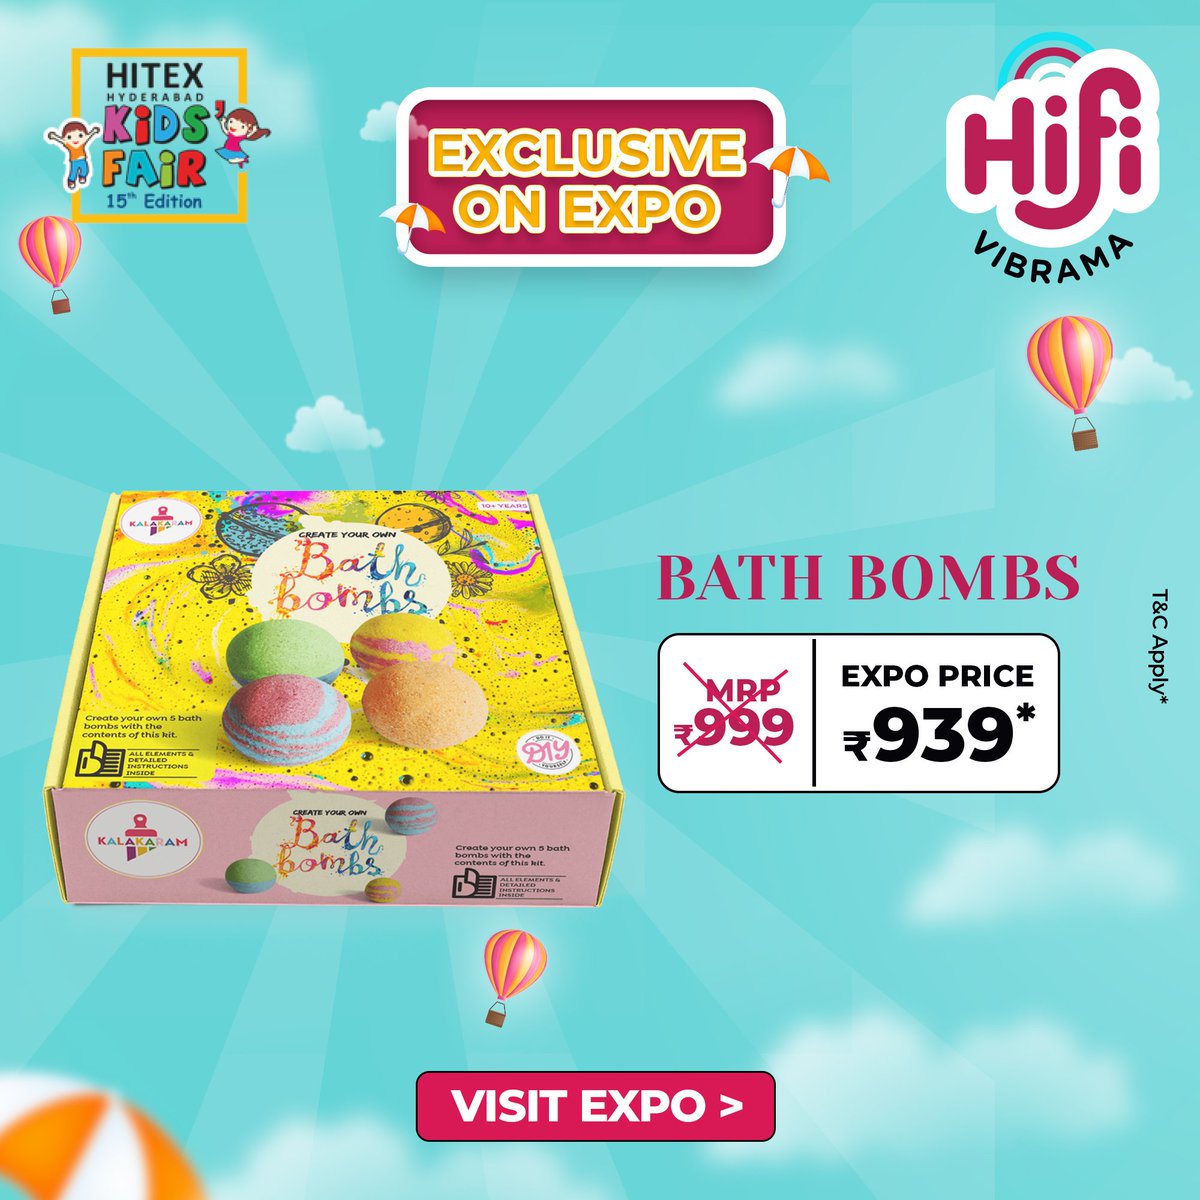 Exclusive on Expo.

Buy Kids Bath Bombs at HIFI Kids Expo. This offers only on Kids Expo only*

Event Date: 23 - 25 December 2022

Stall No: F1 | Hall No: 3

Venue: HITEX, Hyderabad

#expo #exclusiveonexpo #entertainment #exhibition
#bathbombs #bathbombsforsale #bathbombshop